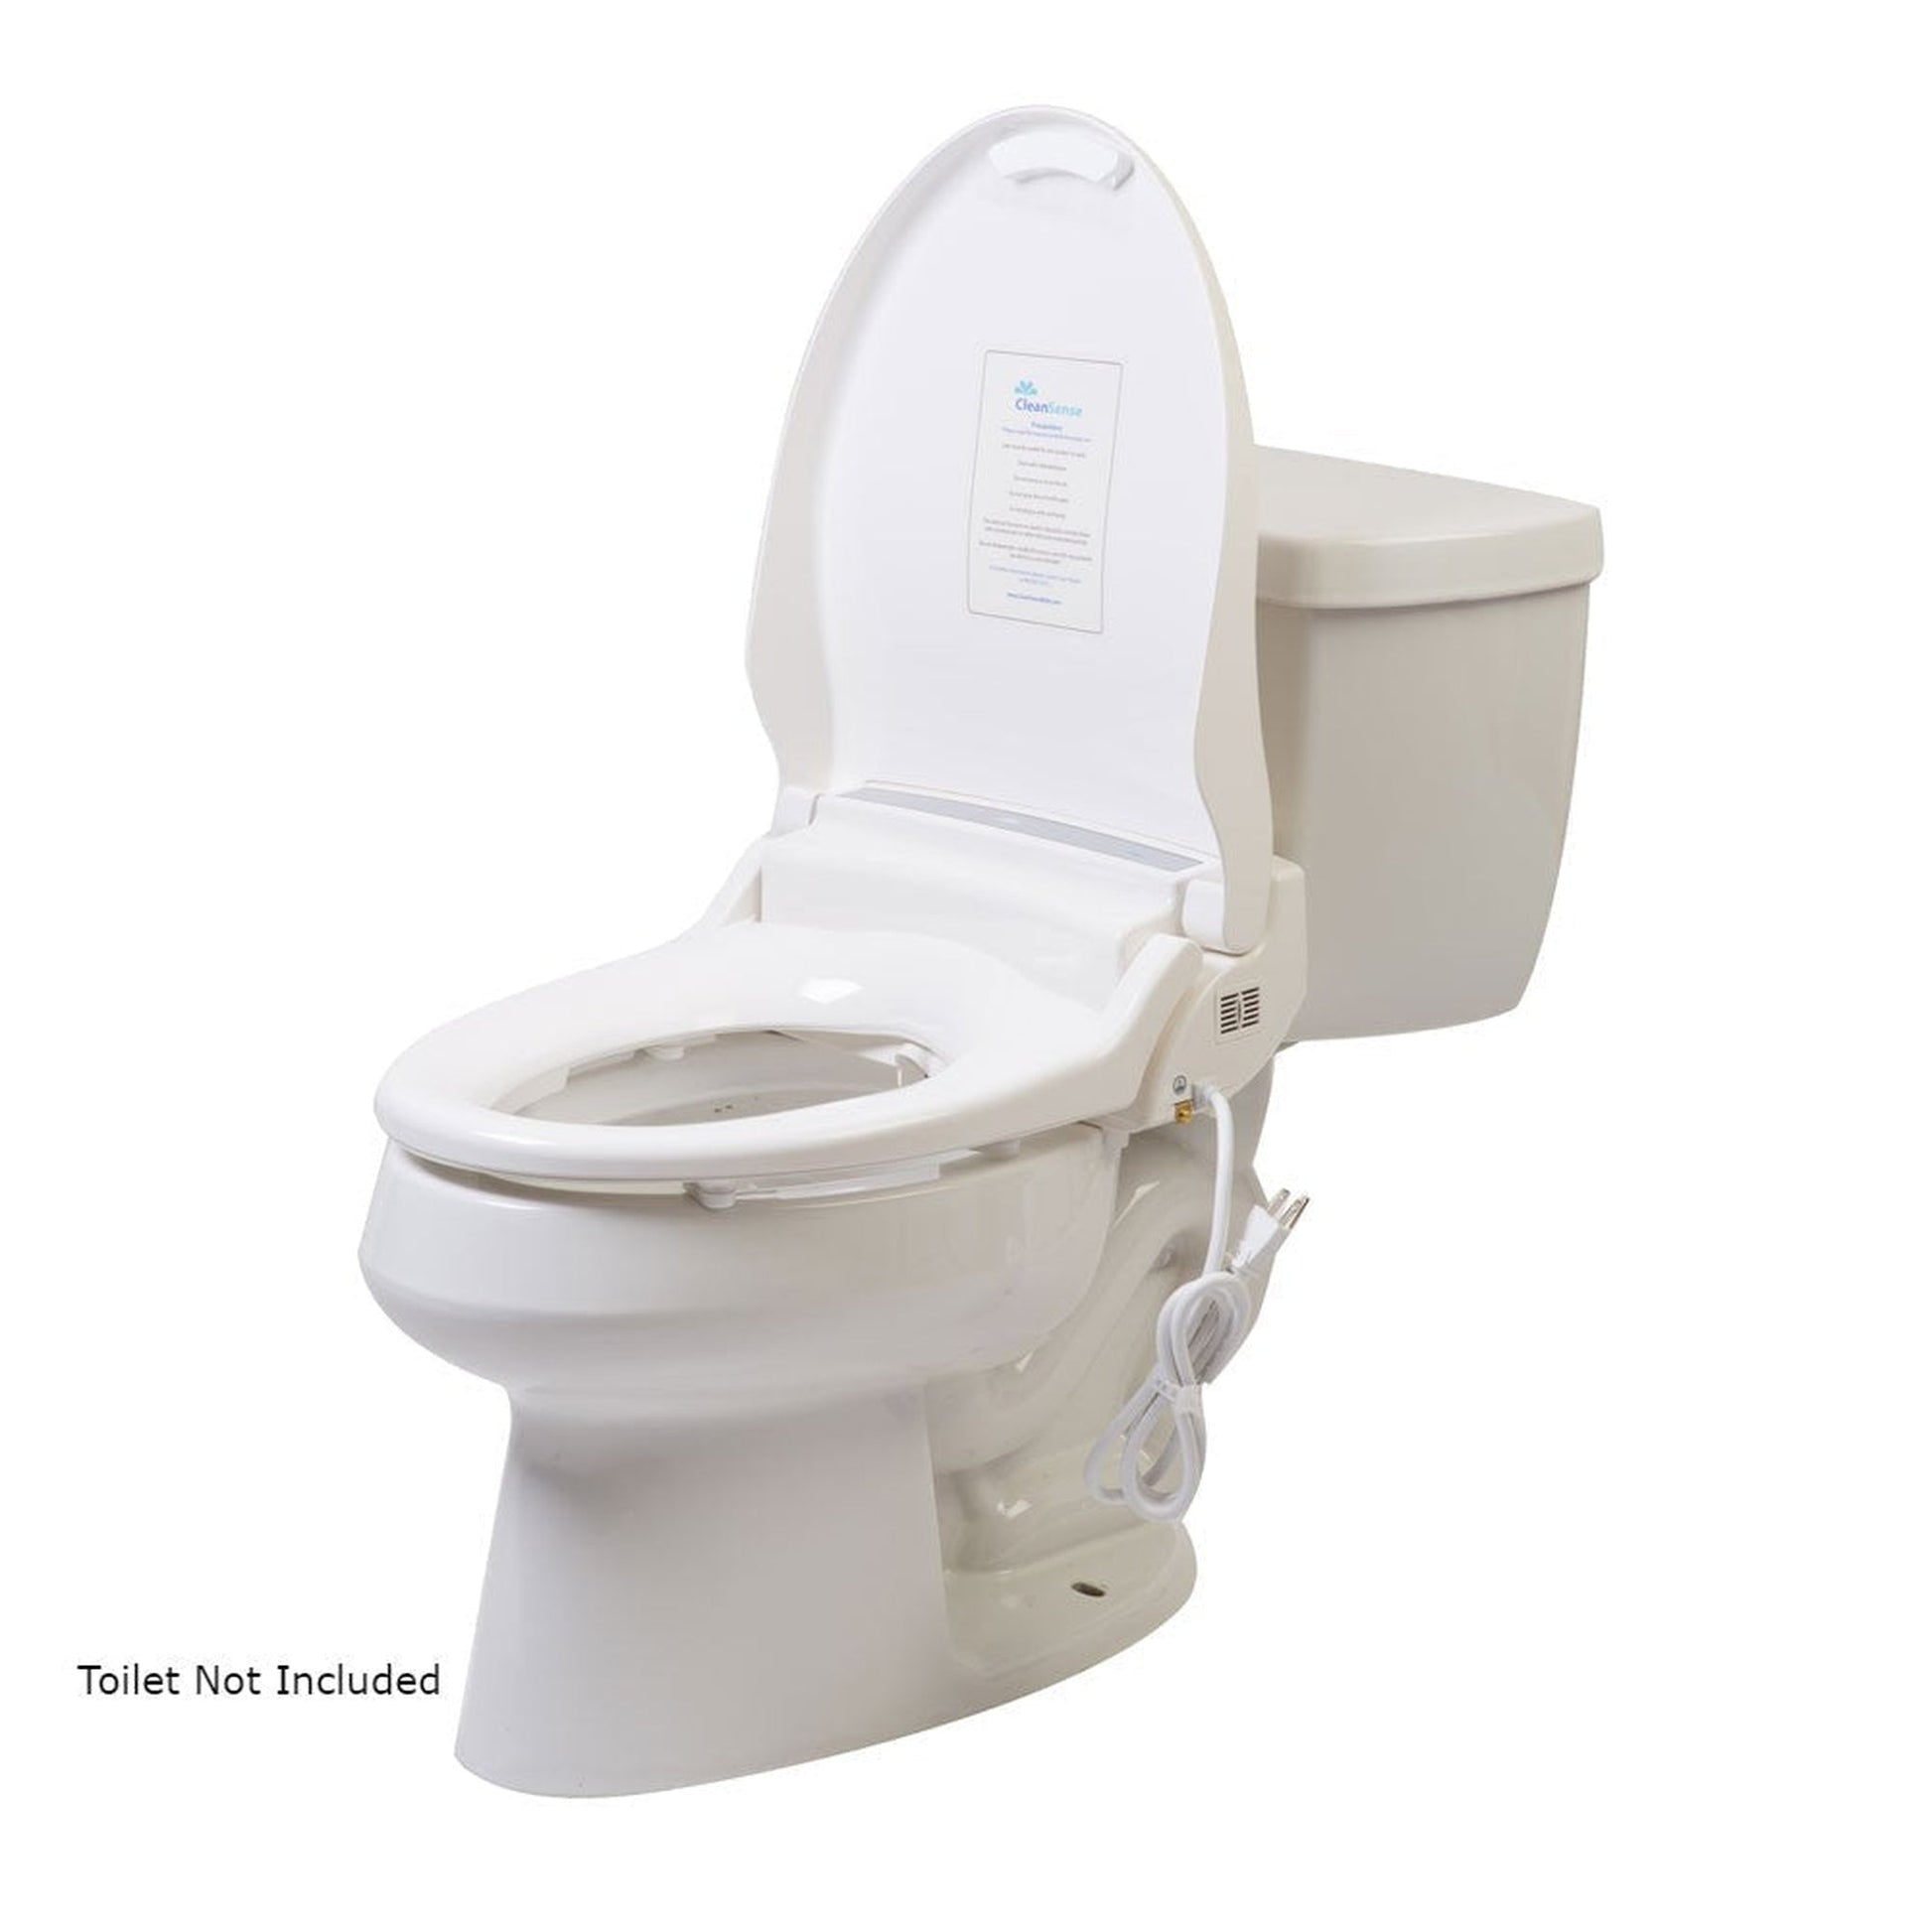 CleanSense DIB-1500R-RW-220 White Advanced Round Bidet Seat With LCD Remote Control and Energy Efficient Water Heating System 220V